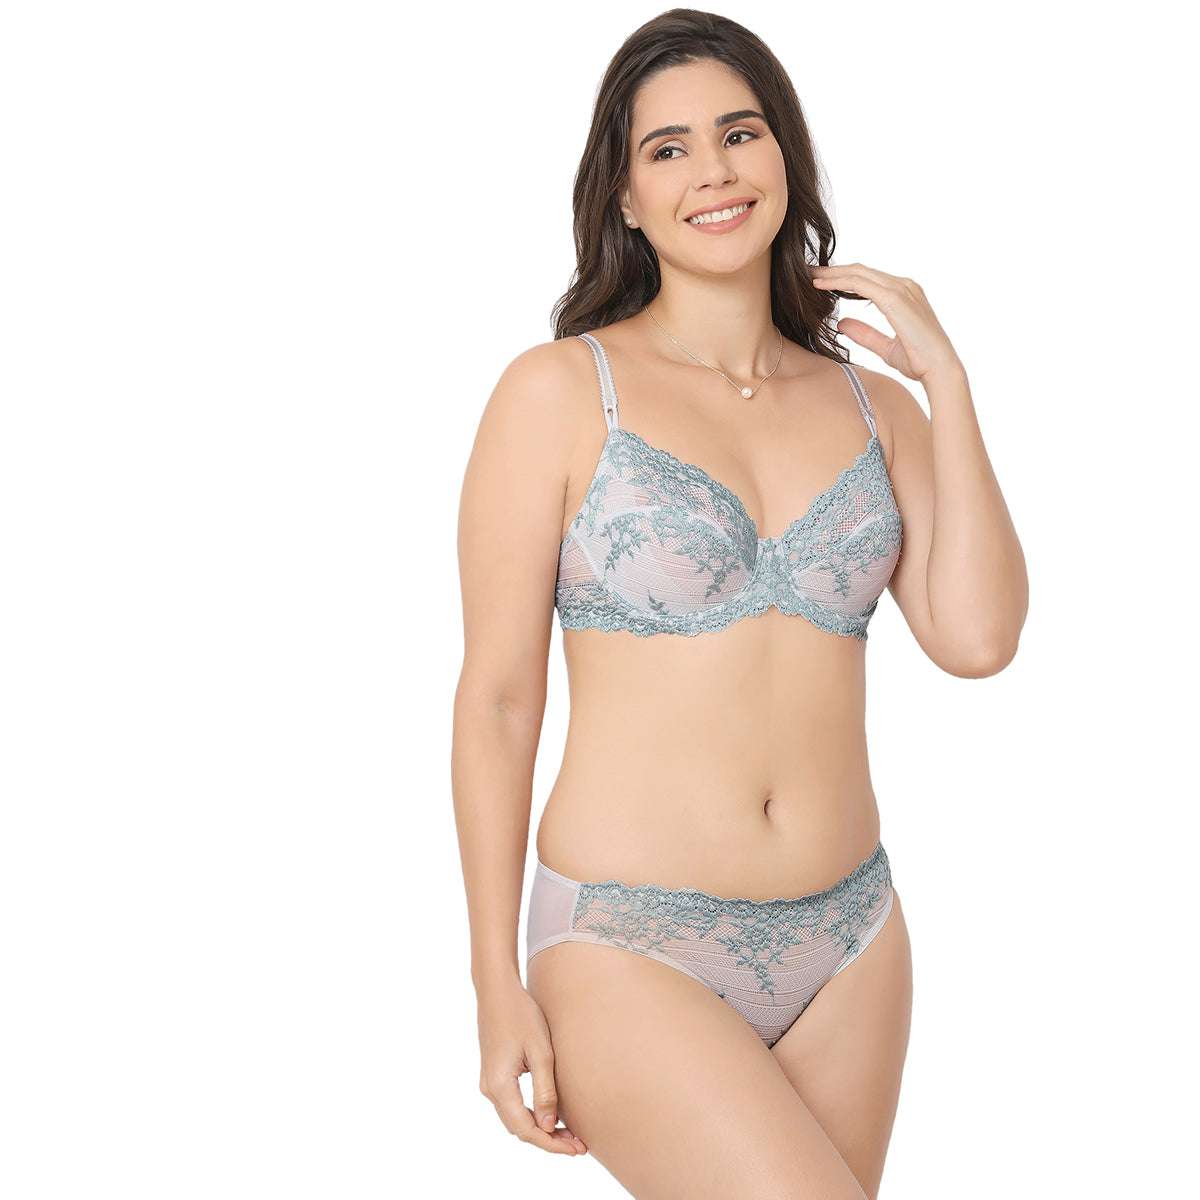 Buy Lace Bra and Panty Online In India -  India